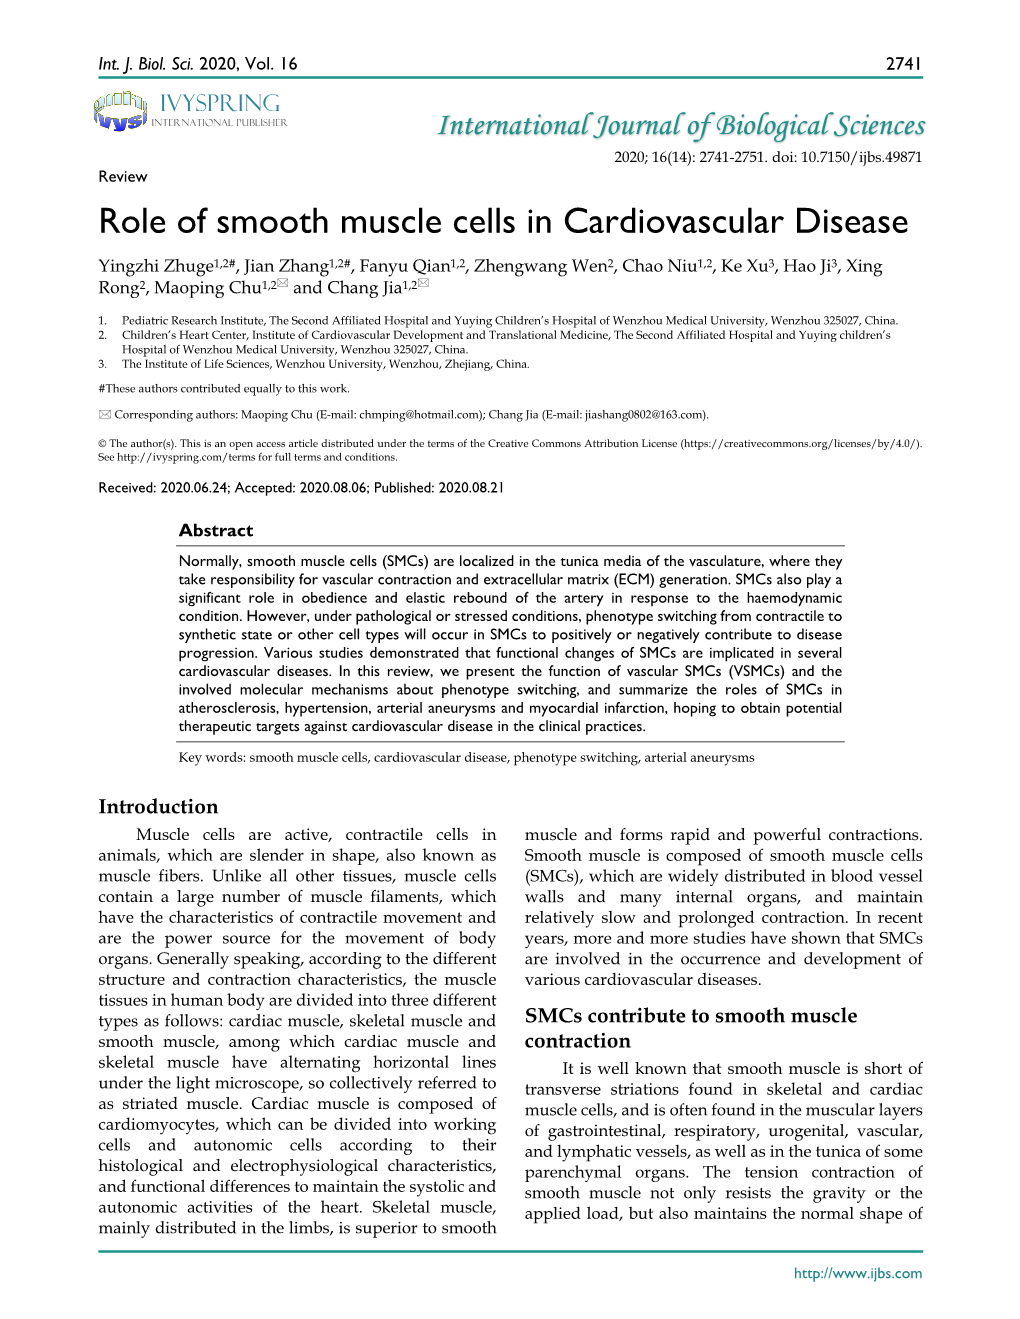 Role of Smooth Muscle Cells in Cardiovascular Disease